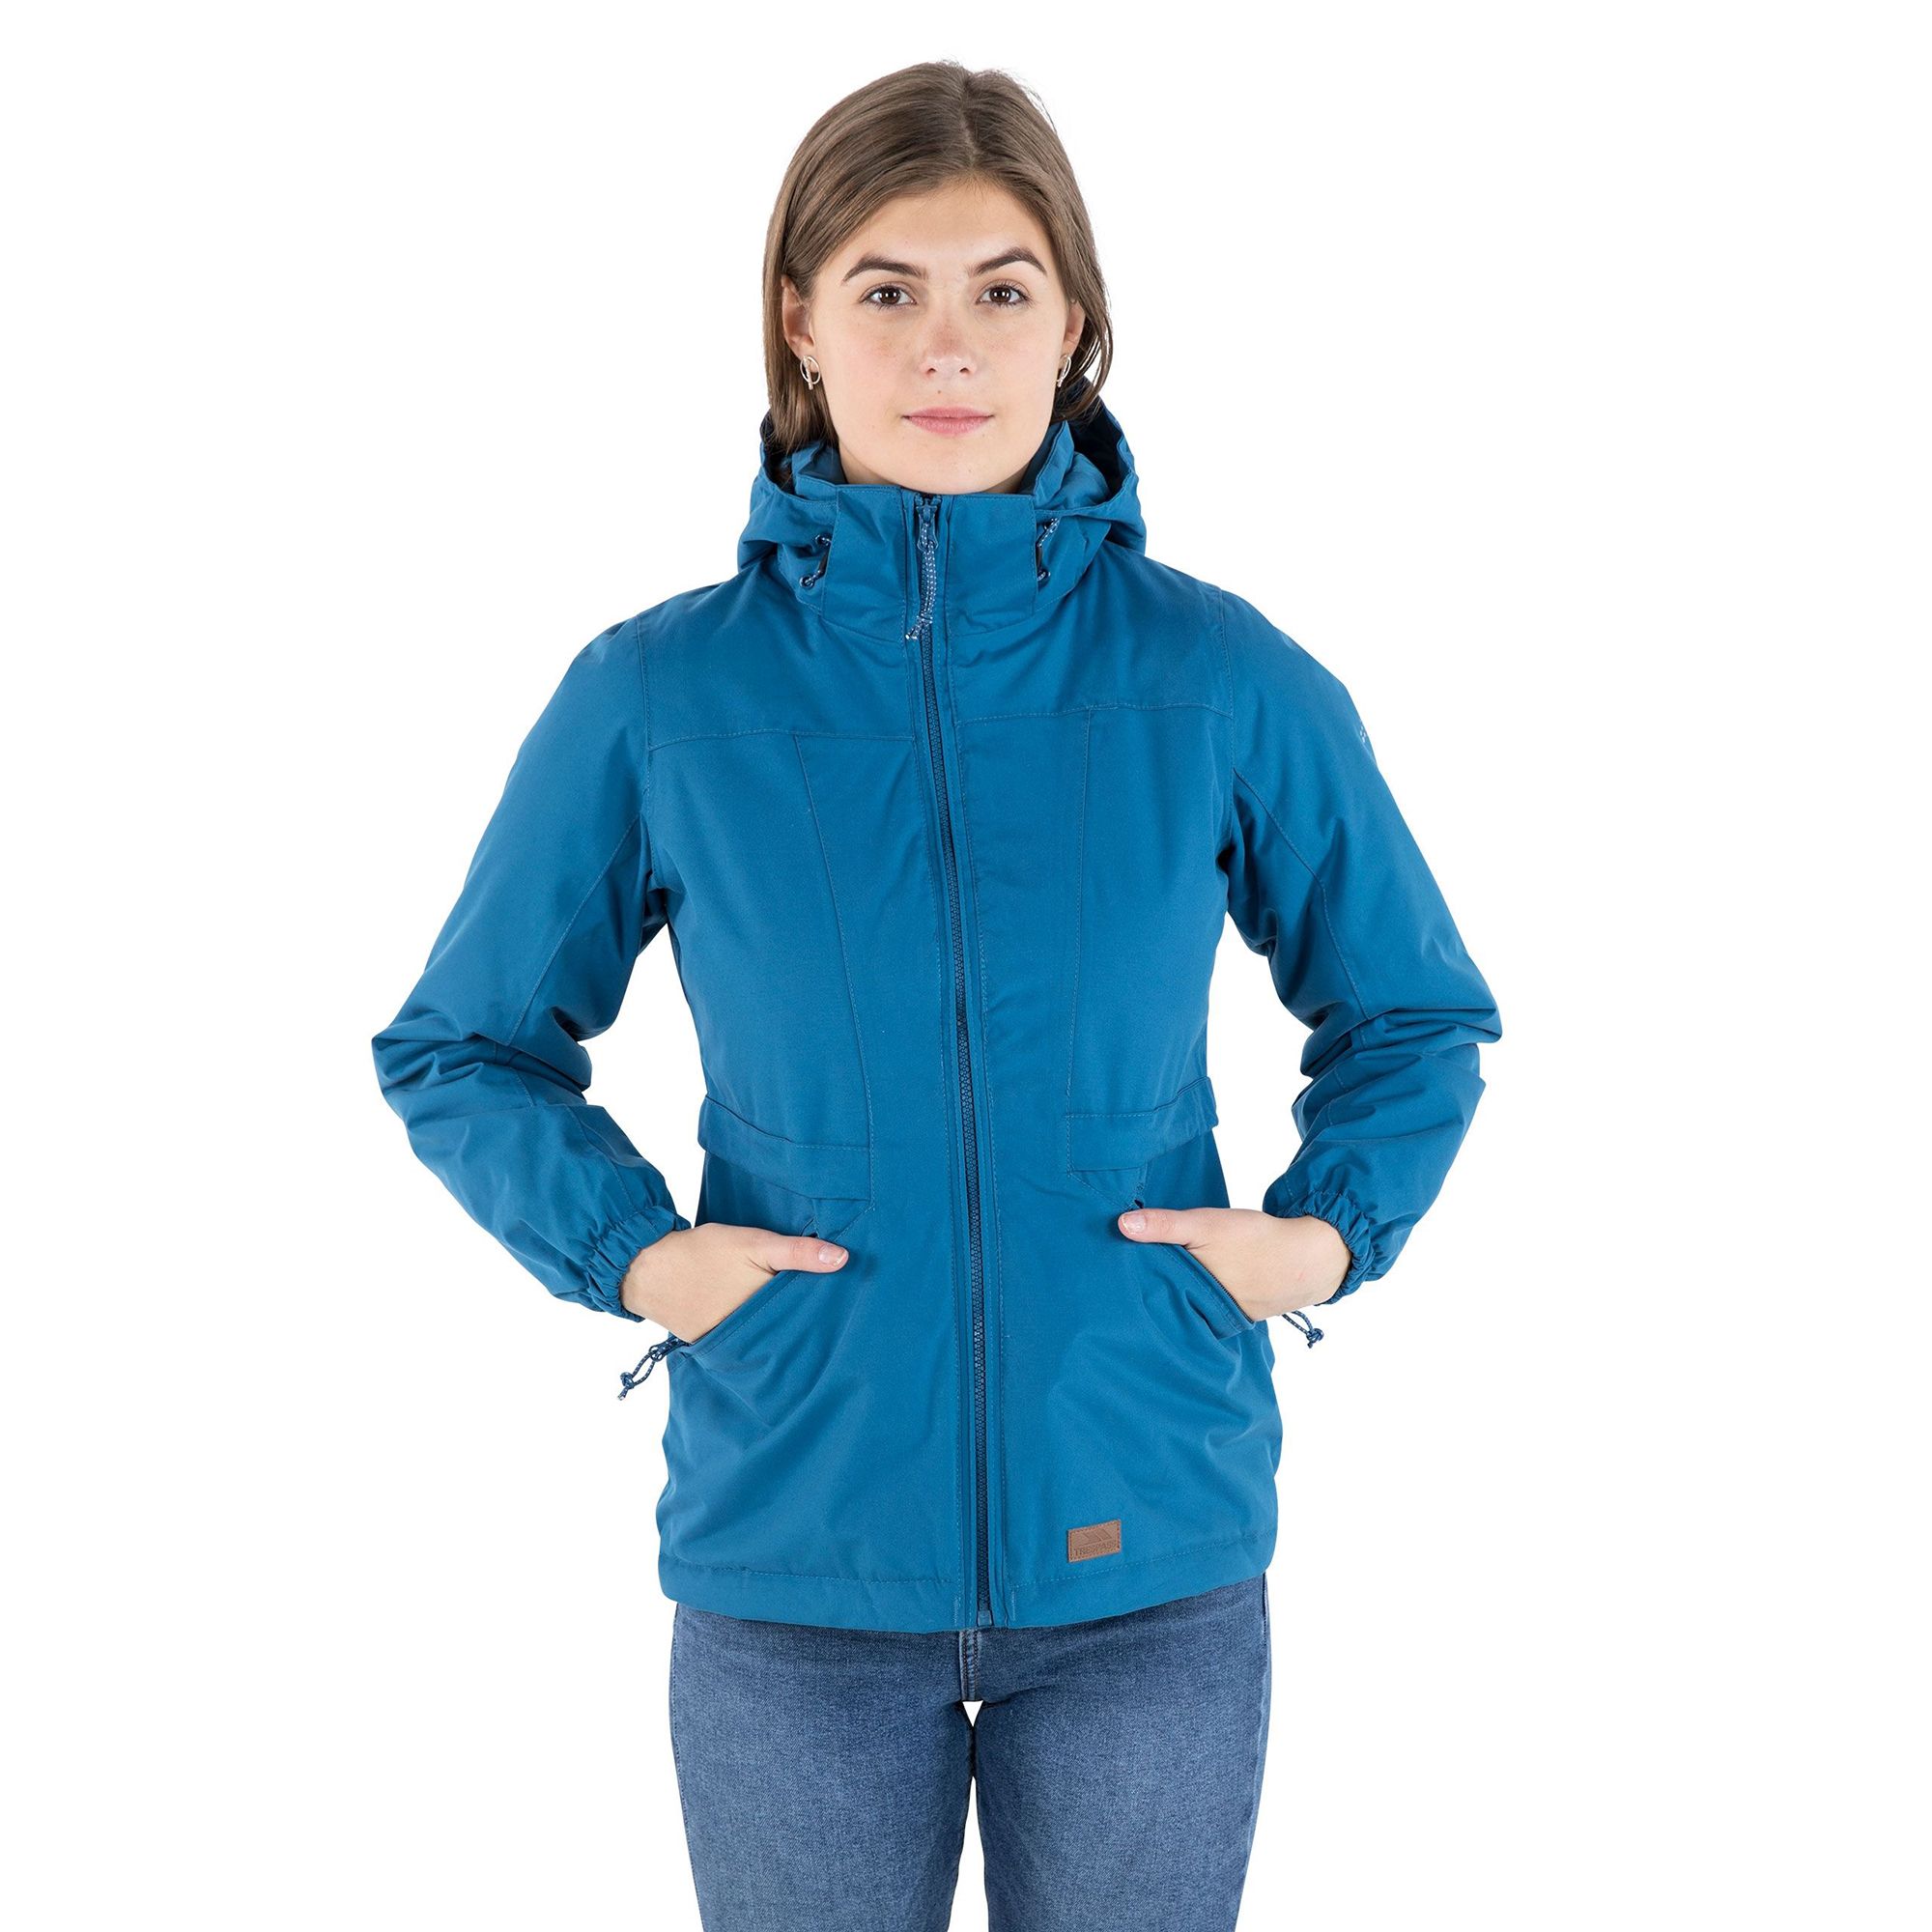 Woven. Shell - 100% polyester microfibre PVC. Lining - 100% polyester. Filling - 100% polyester. Padded. Adjustable stud off hood. Adjustable waist with cord/toggle. Elasticated cuff. 2x lower profile zip pockets with garage shaped panels.